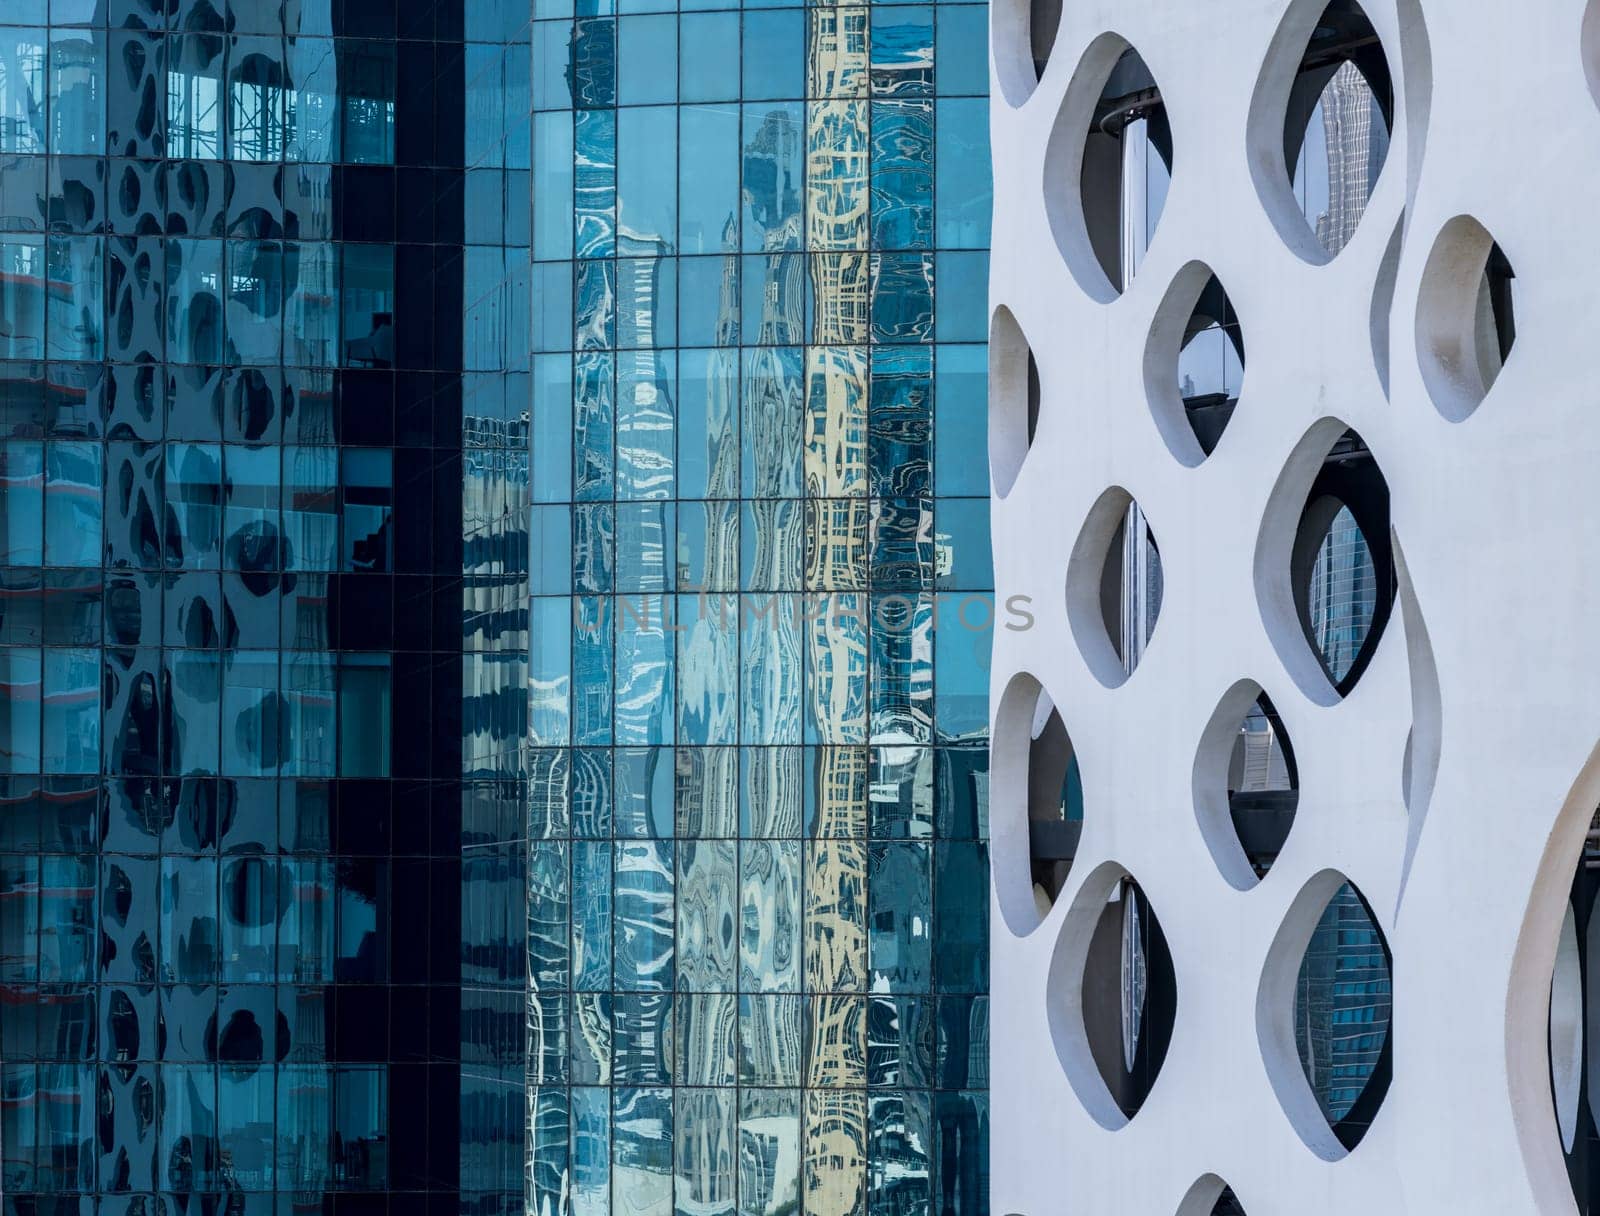 Detail of different designs on apartments in Business Bay Dubai by steheap